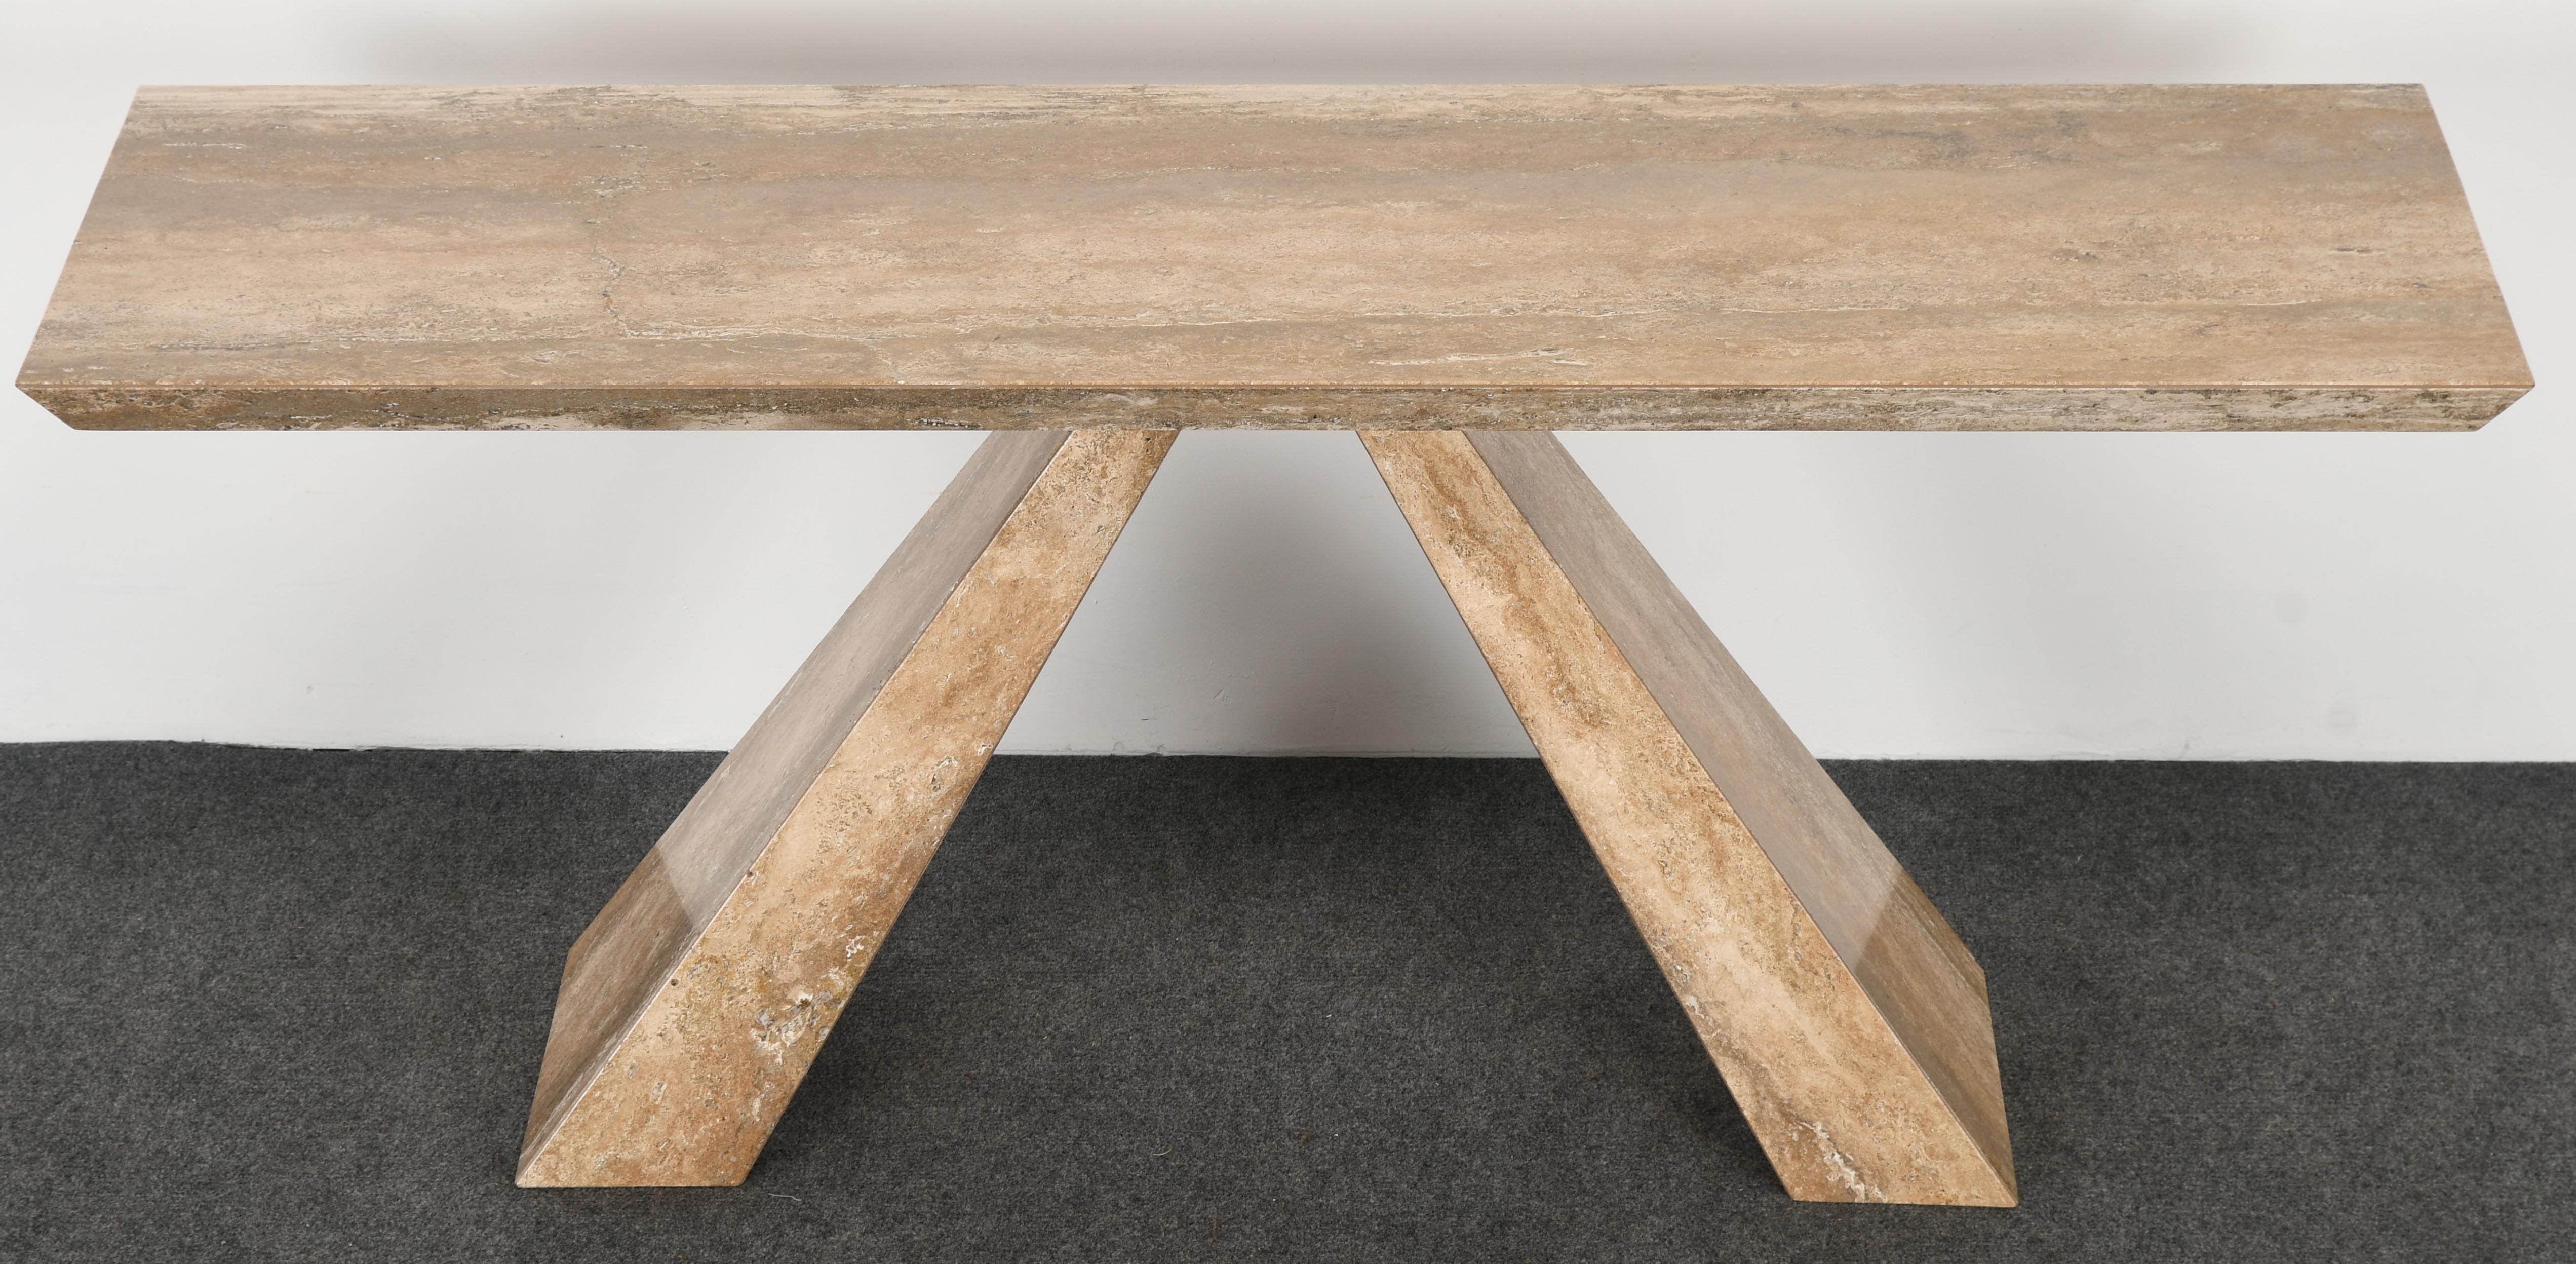 A chic Italian modernist travertine console table. The marble table has beautiful veining throughout the surface. On the backside, there is one filled in grain, as shown in images. The table is structurally sound and in very good